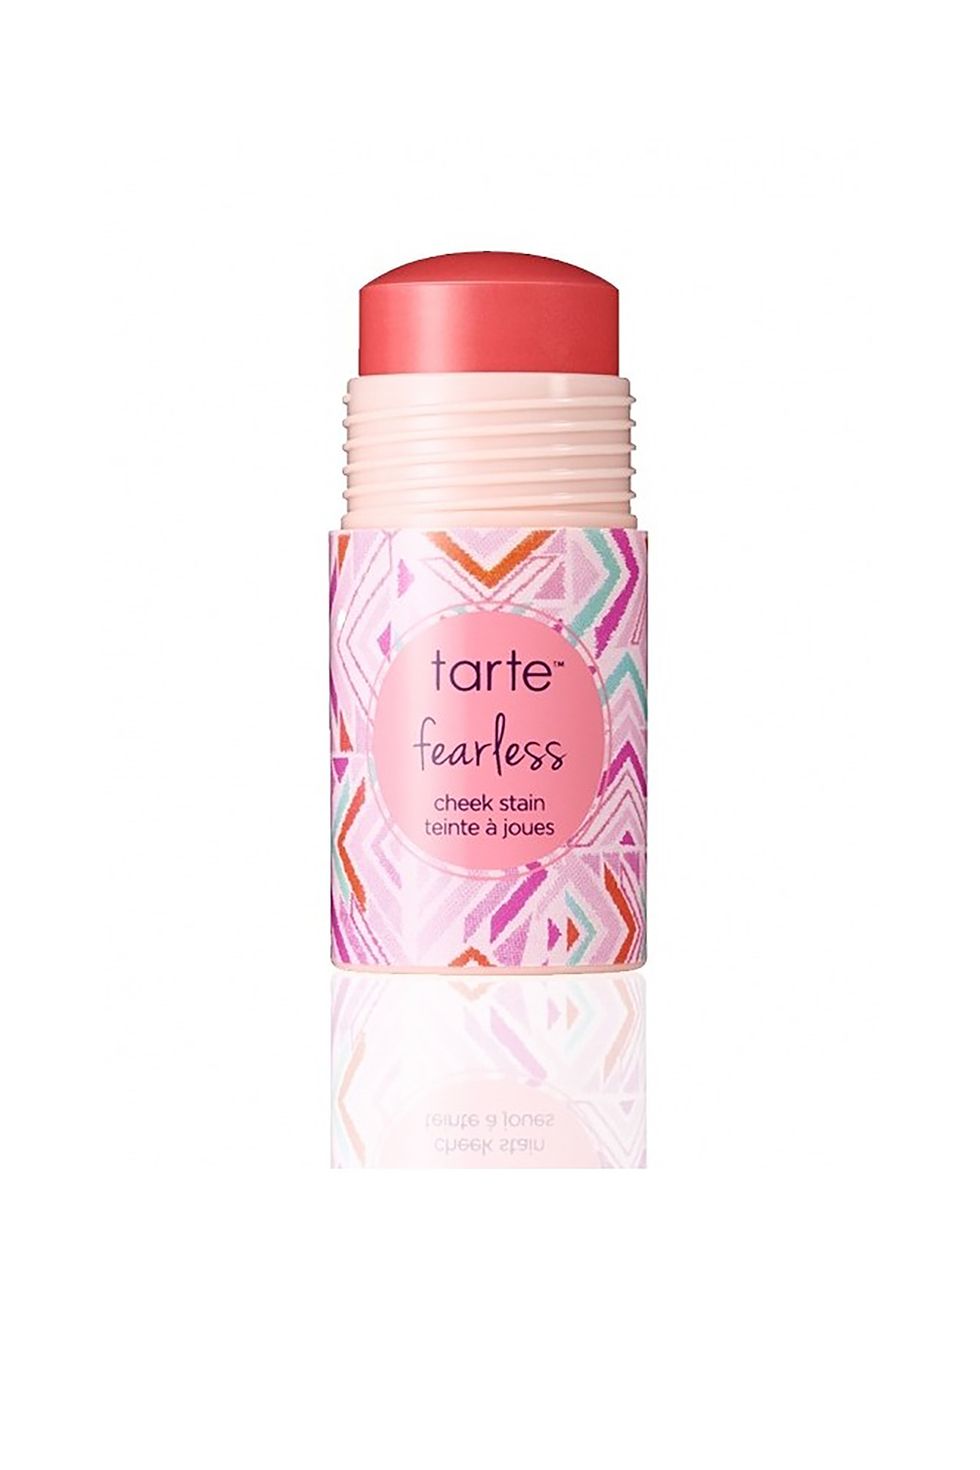 <p>For easily blendable color that doesn't dry too quickly or leave skin feeling cakey, look to this cheek stain made with fruit extracts that has a tiny hint of shimmer. </p><p><strong>Tarte Cheek Stain, $30; <a href="http://www.ulta.com/ulta/browse/productDetail.jsp?productId=xlsImpprod6340099" target="_blank">ulta.com</a>.</strong></p>